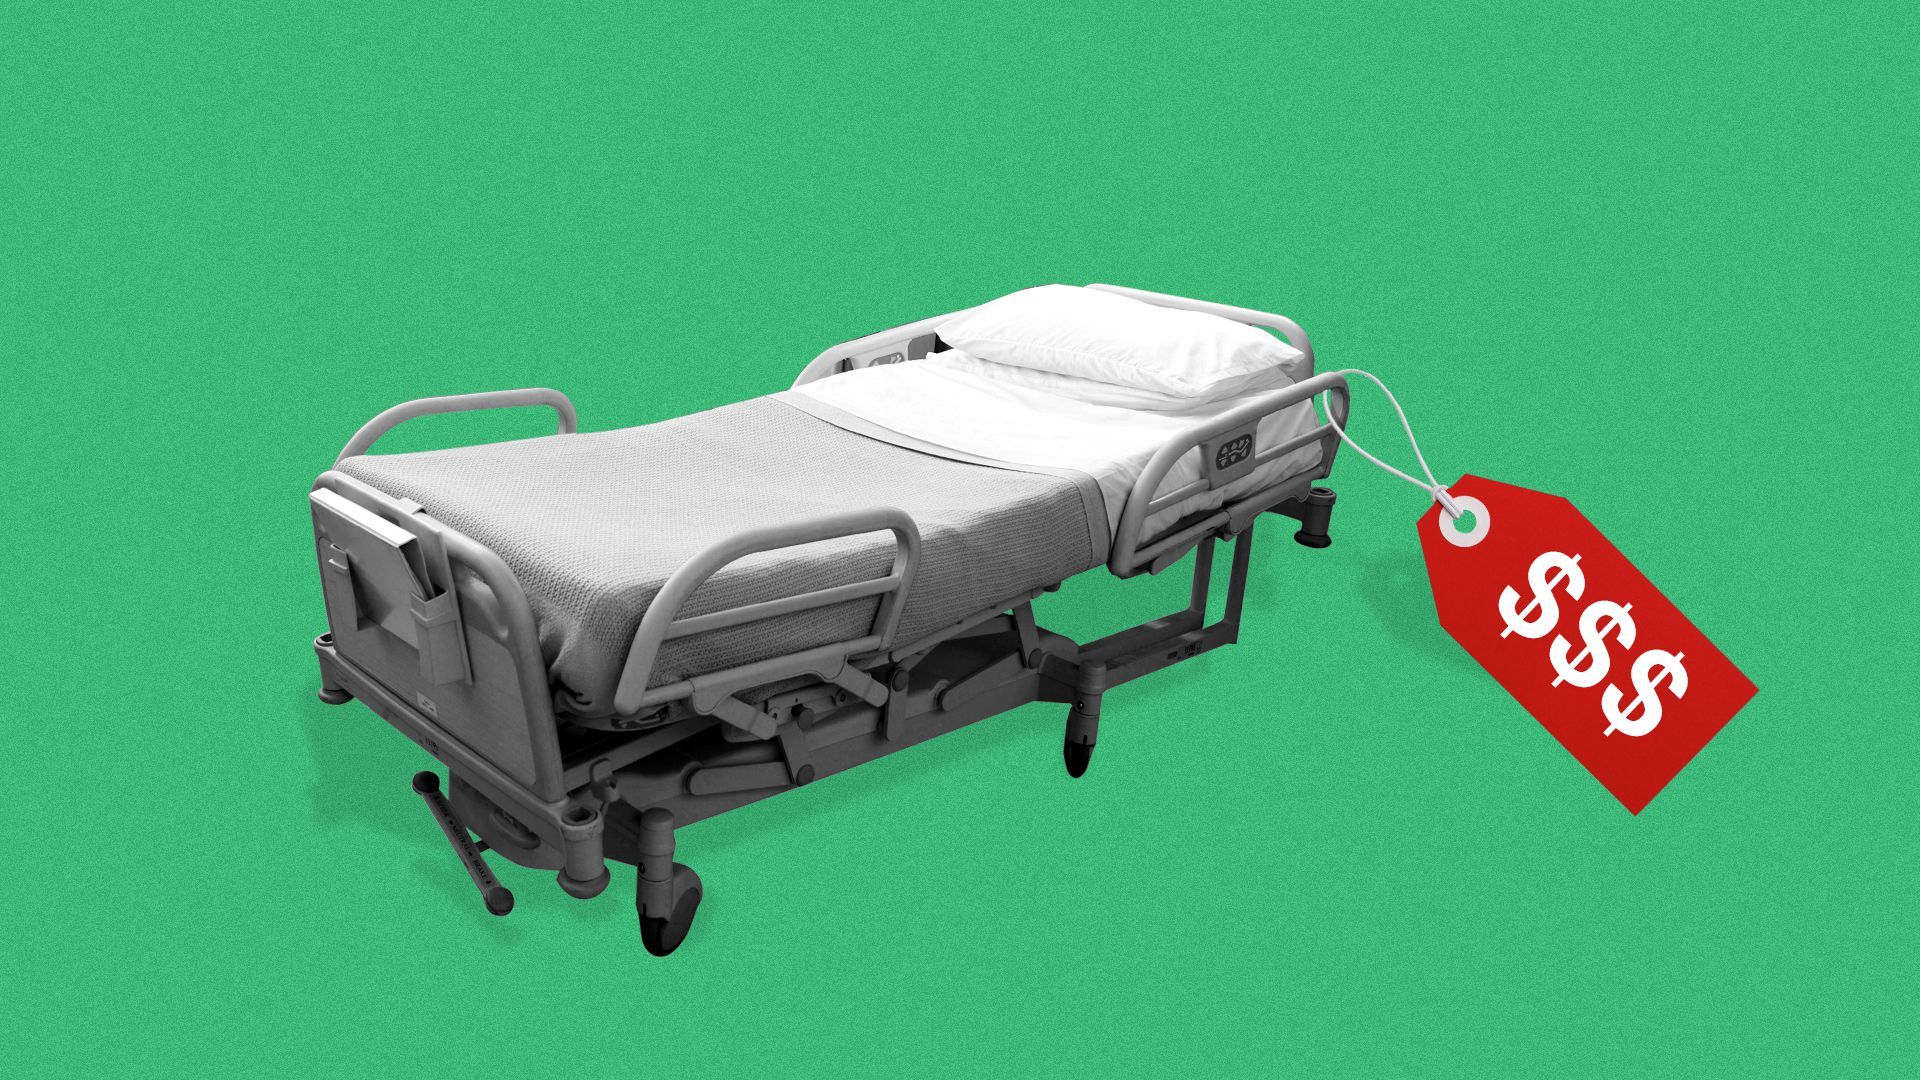 Illustration of a hospital bed with a price tag.